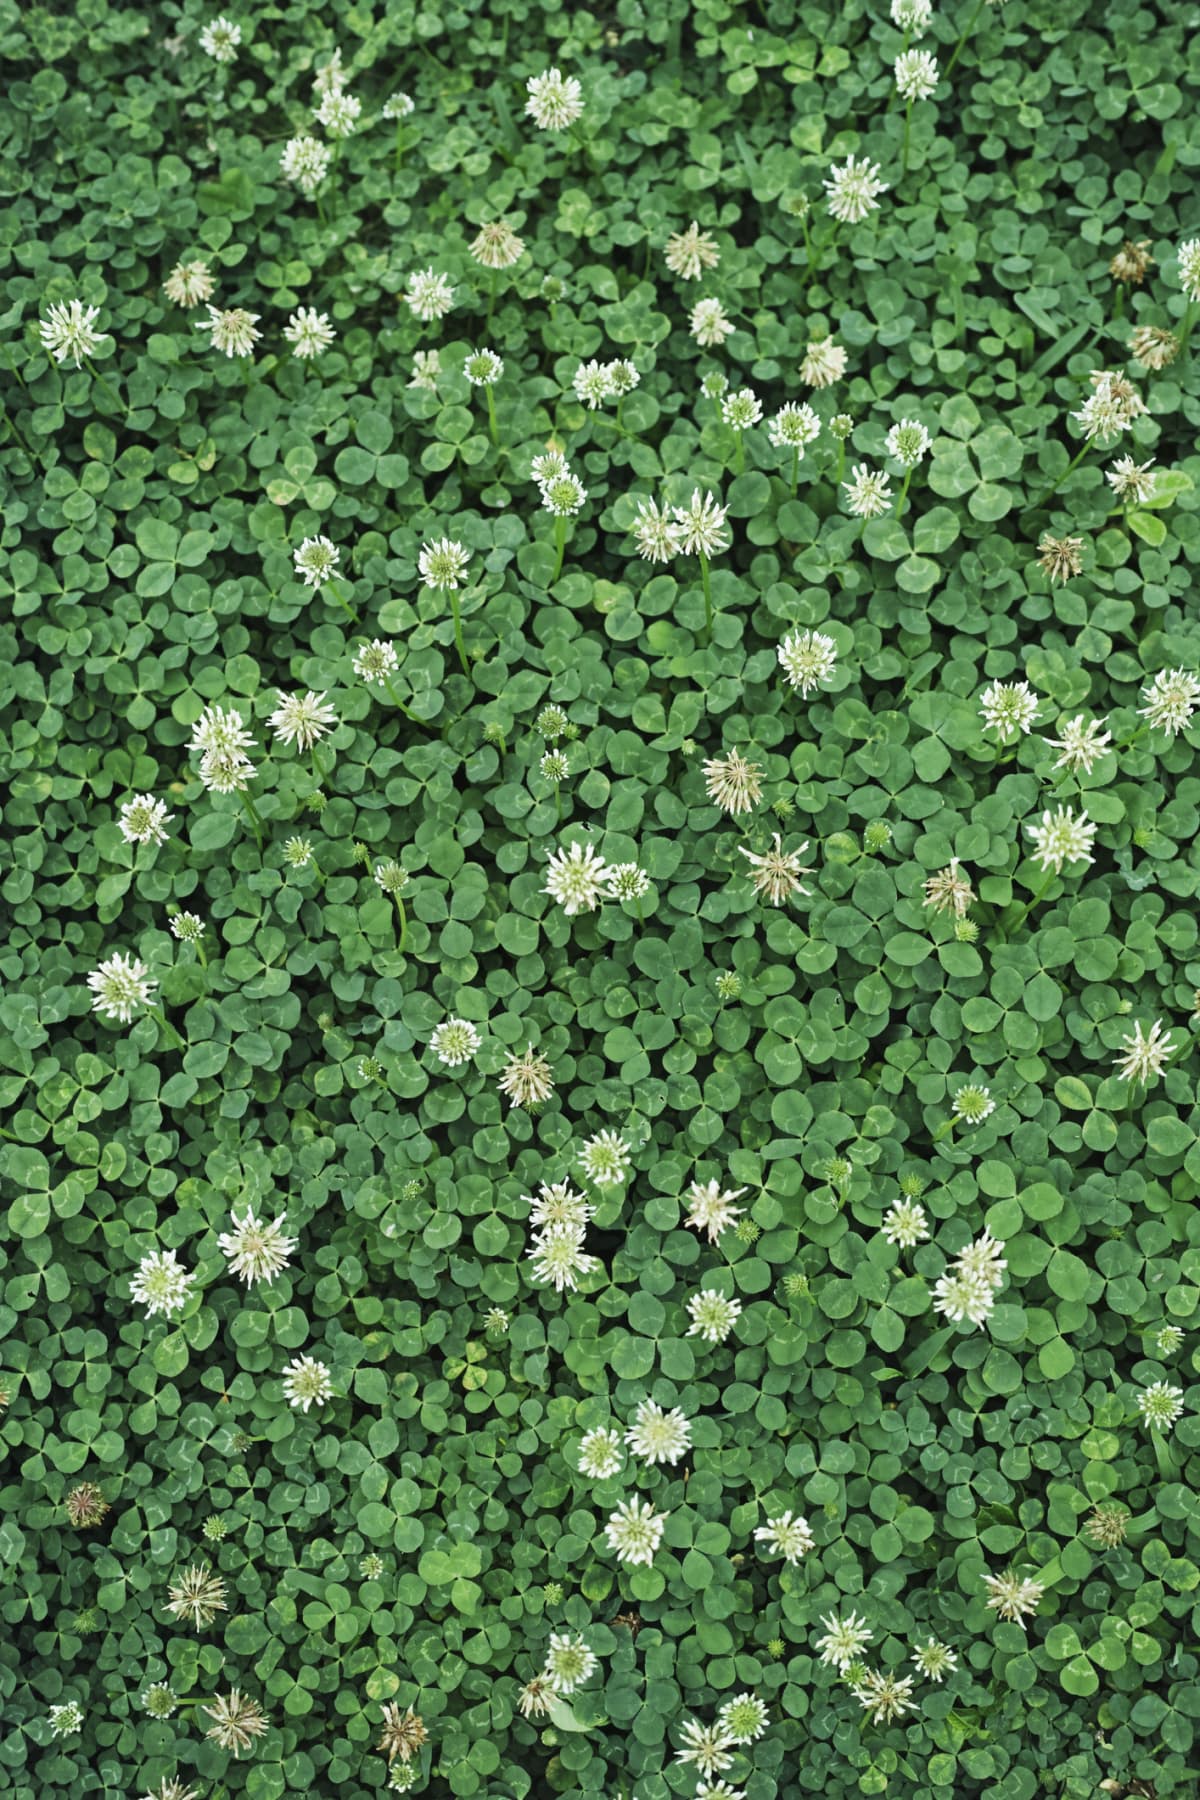 Clover plants in the lawn